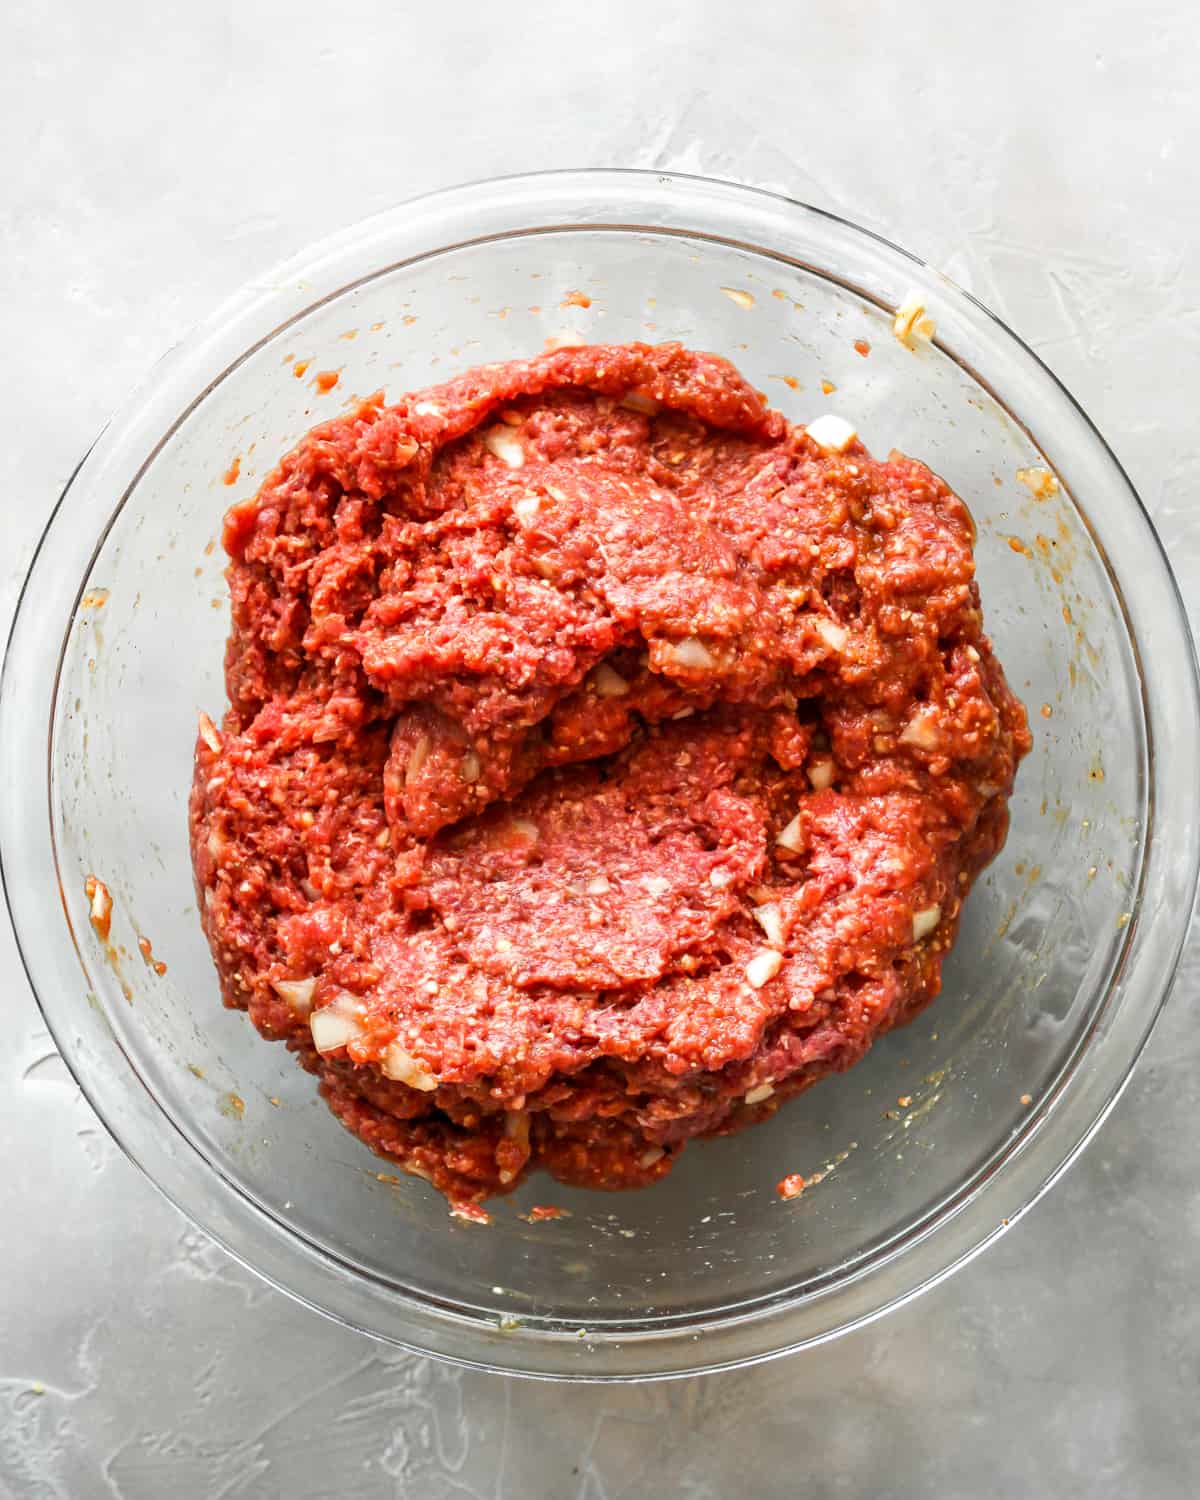 How to Make Meatloaf - meatloaf mixture after mixing